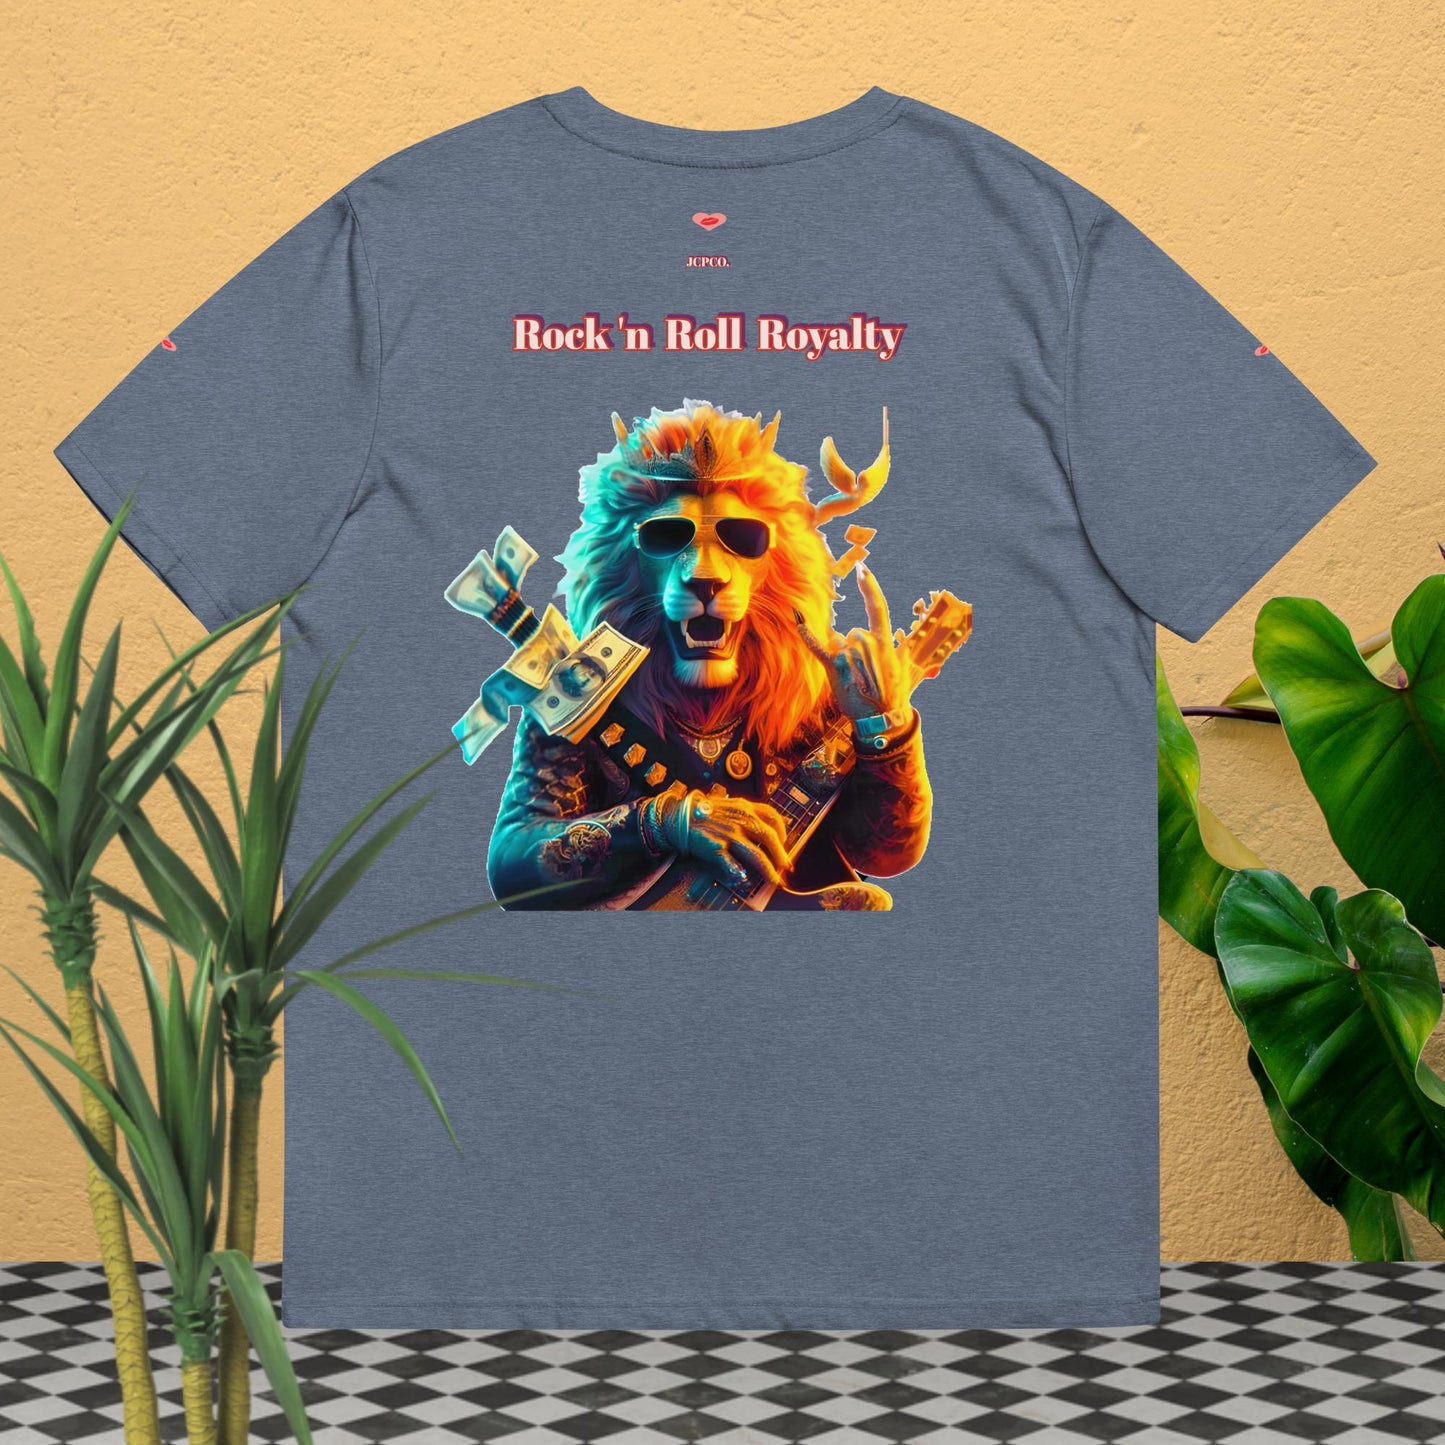 👑🦁Heavenly Crown Earthly Sound Rock 'n Roll🎸Unisex Organic Cotton T-Shirt👕